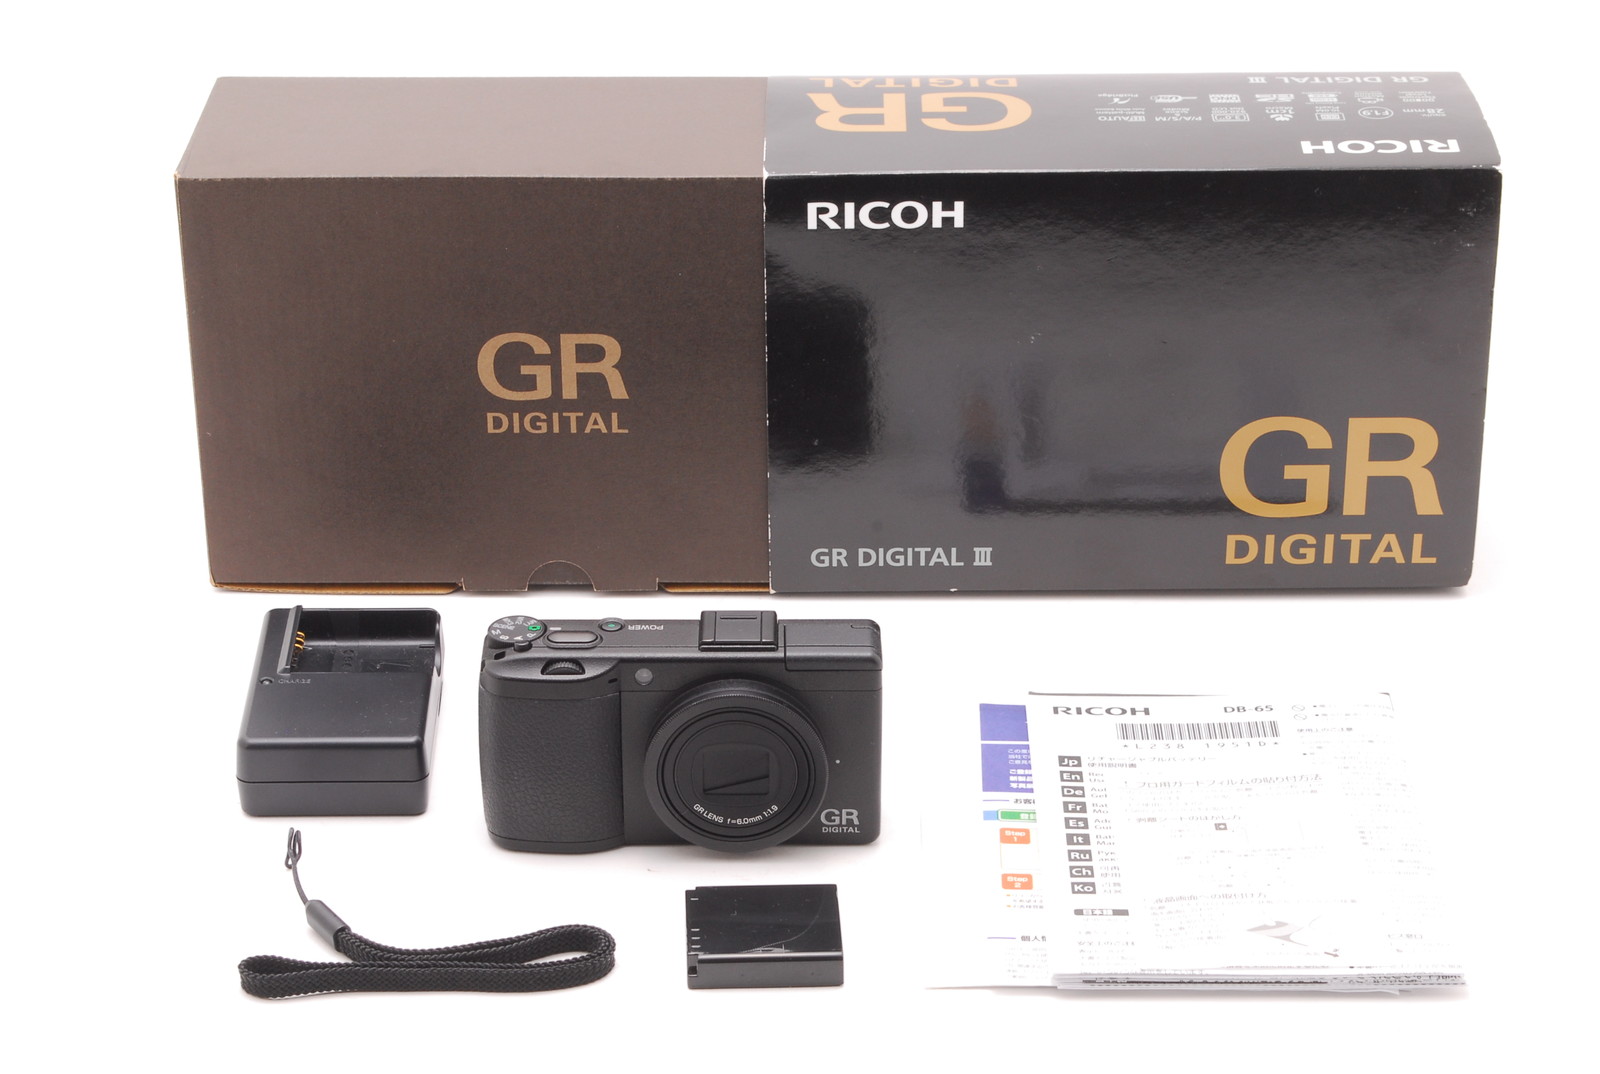 PROMOTION. MINT Count 1928 RICOH GR Digital III, Box, Manual, Charger, CD, Strap from Japan